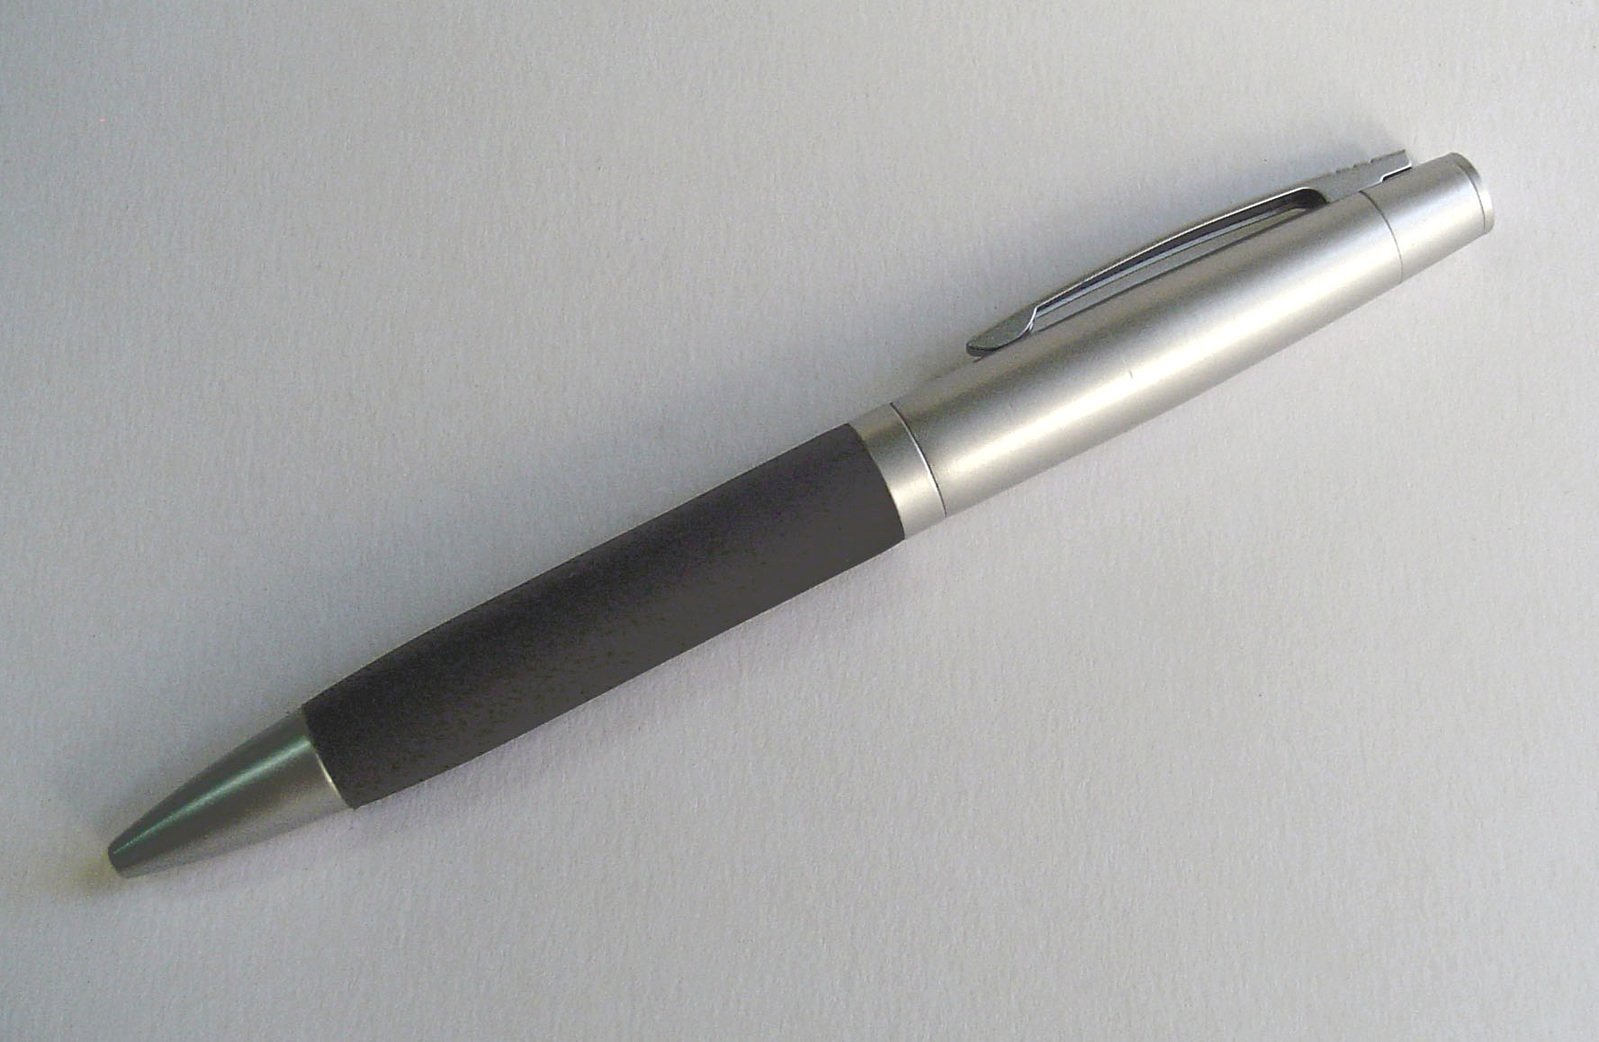 a pen resting on a white surface with the tip in the air